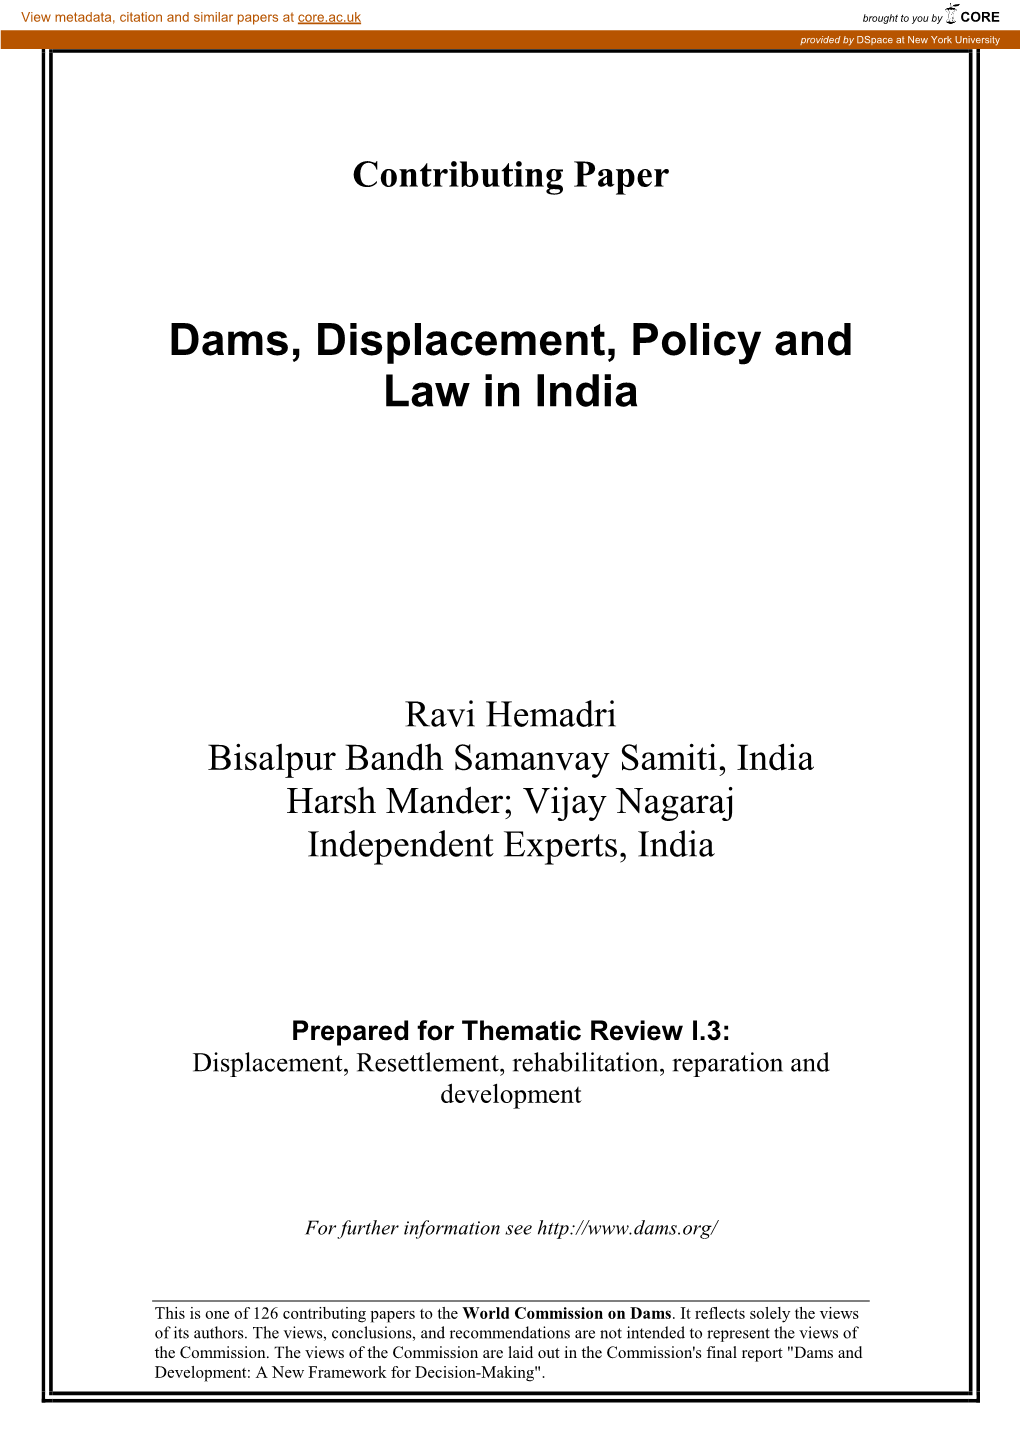 Dams, Displacement, Policy and Law in India